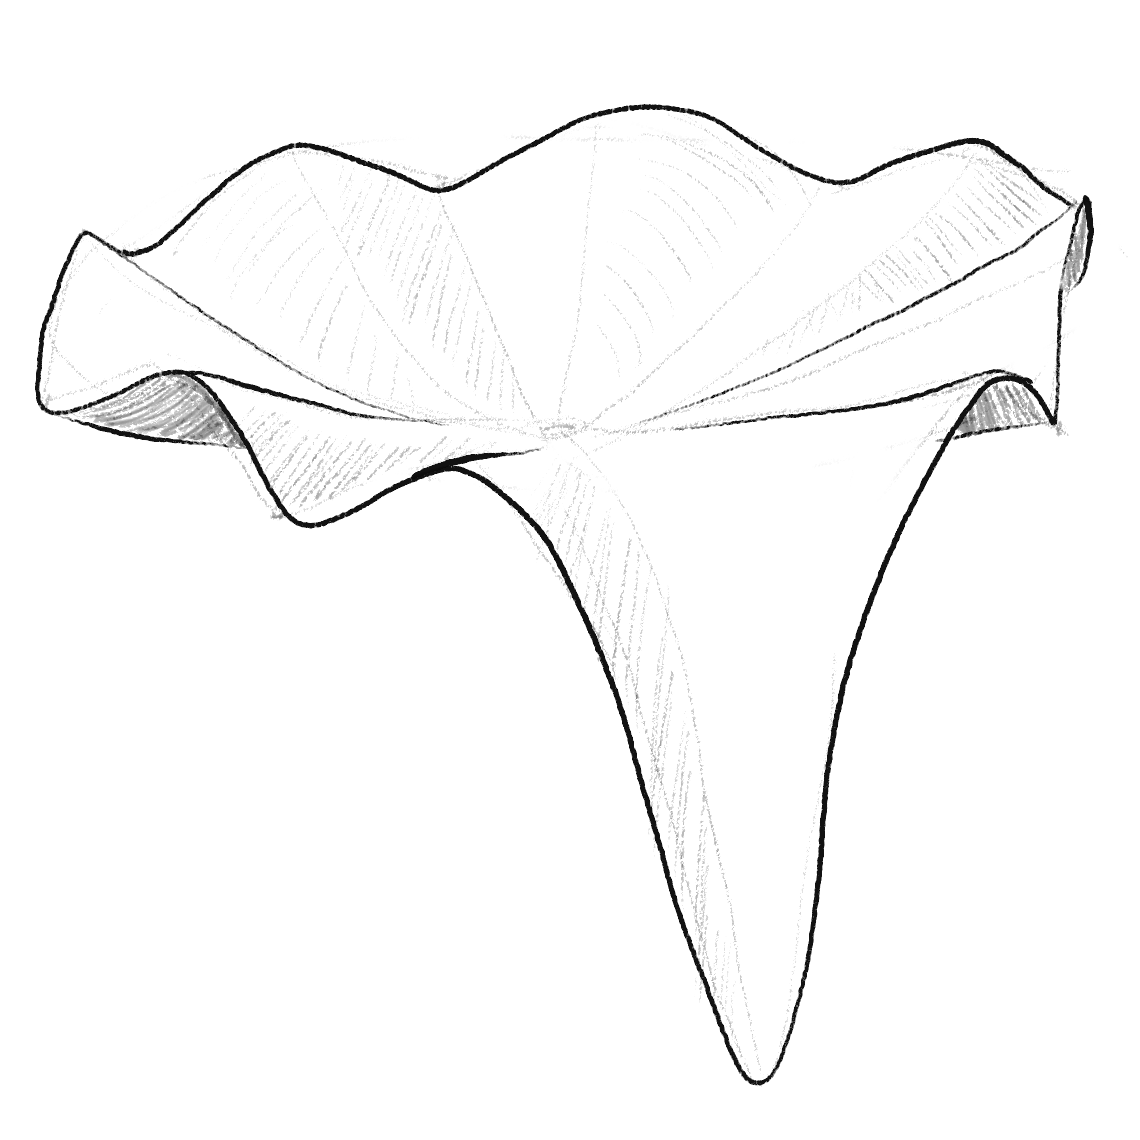 Drawing of an "octopus saddle" (looks like a wavy cloth skirt)